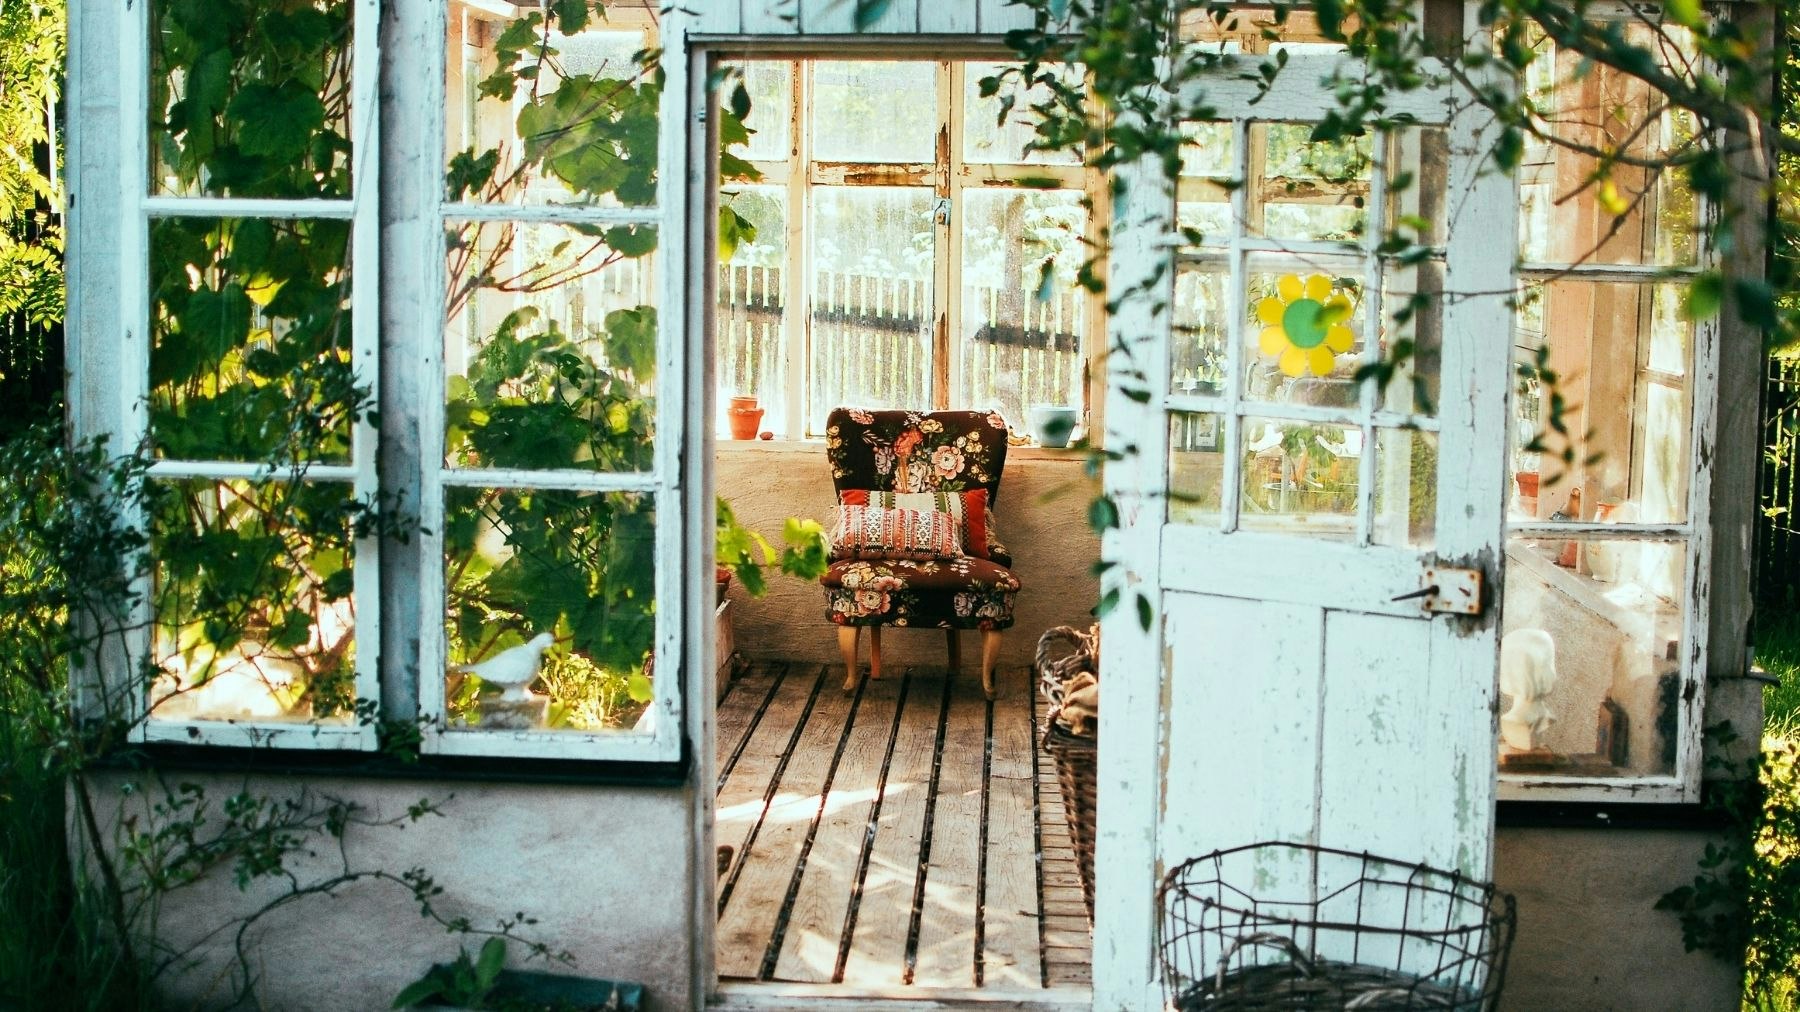 https://images.bauerhosting.com/legacy/media/603d/2135/cd12/4908/5f4a/45ec/Garden_shed_with_colourful_chair_Arno_Smit.jpg?ar=16%3A9&fit=crop&crop=top&auto=format&w=undefined&q=80